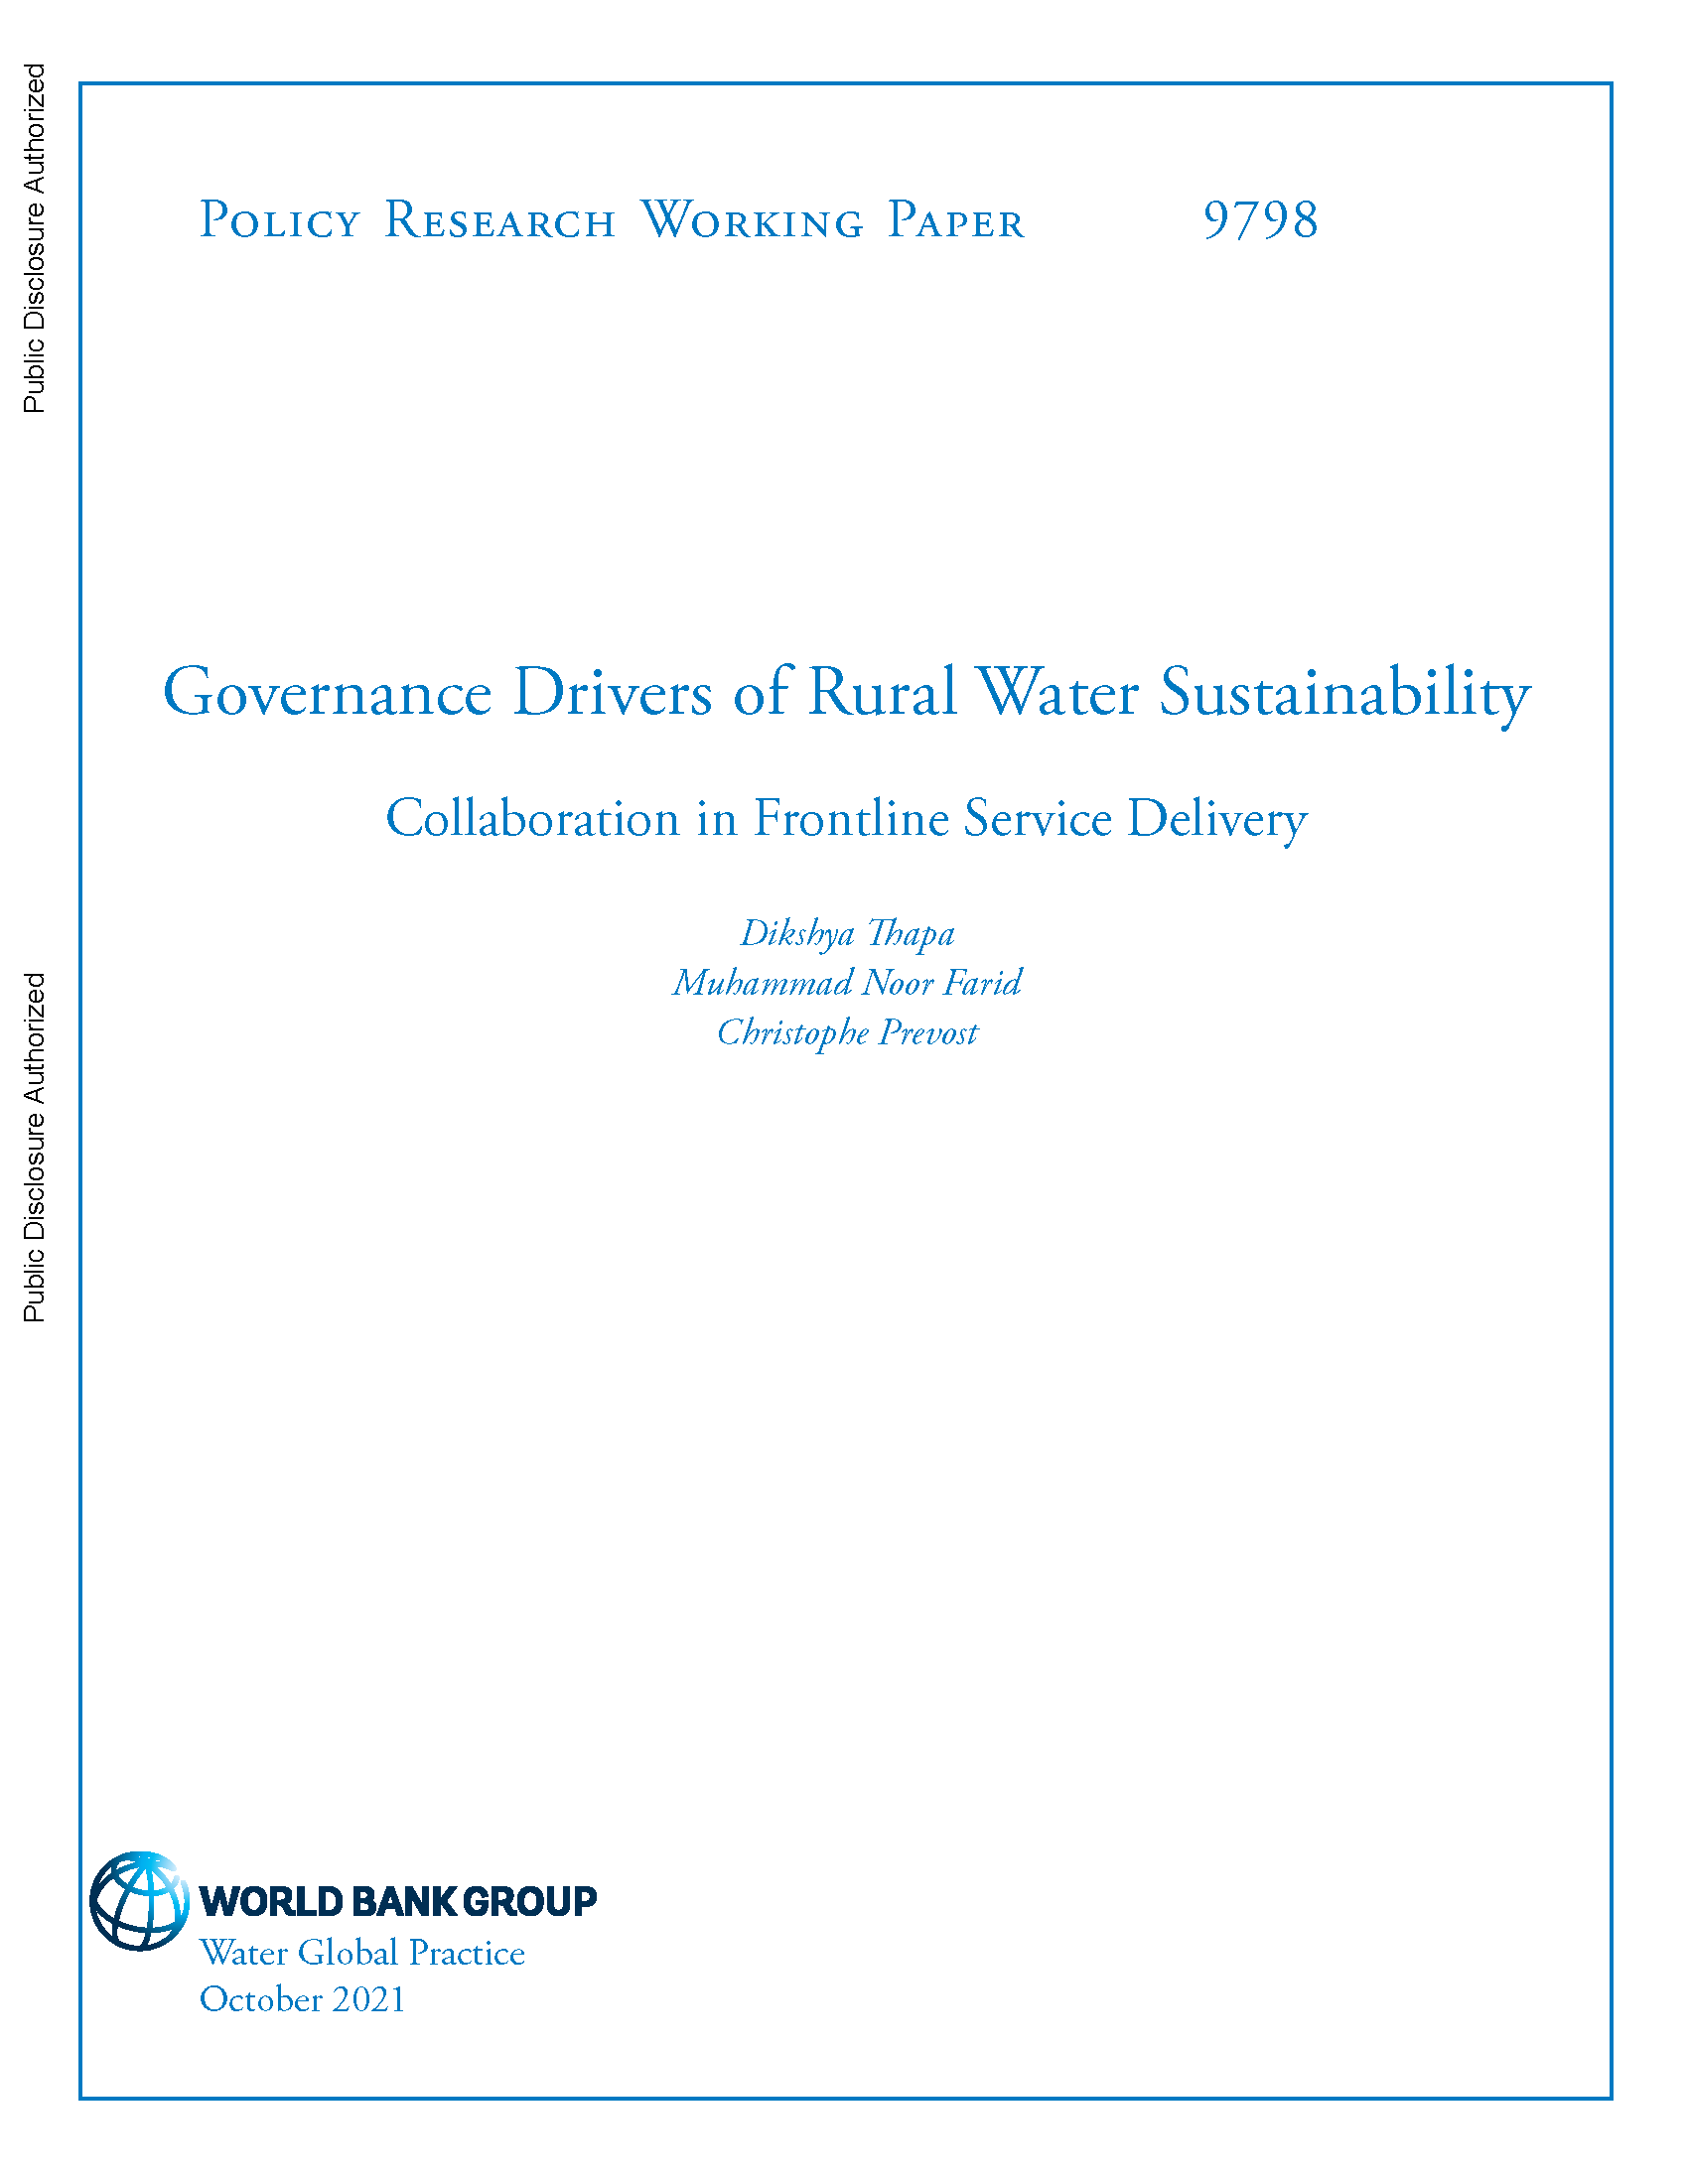 Cover page for Governance Drivers of Rural Water Sustainability: Collaboration in Frontline Service Delivery